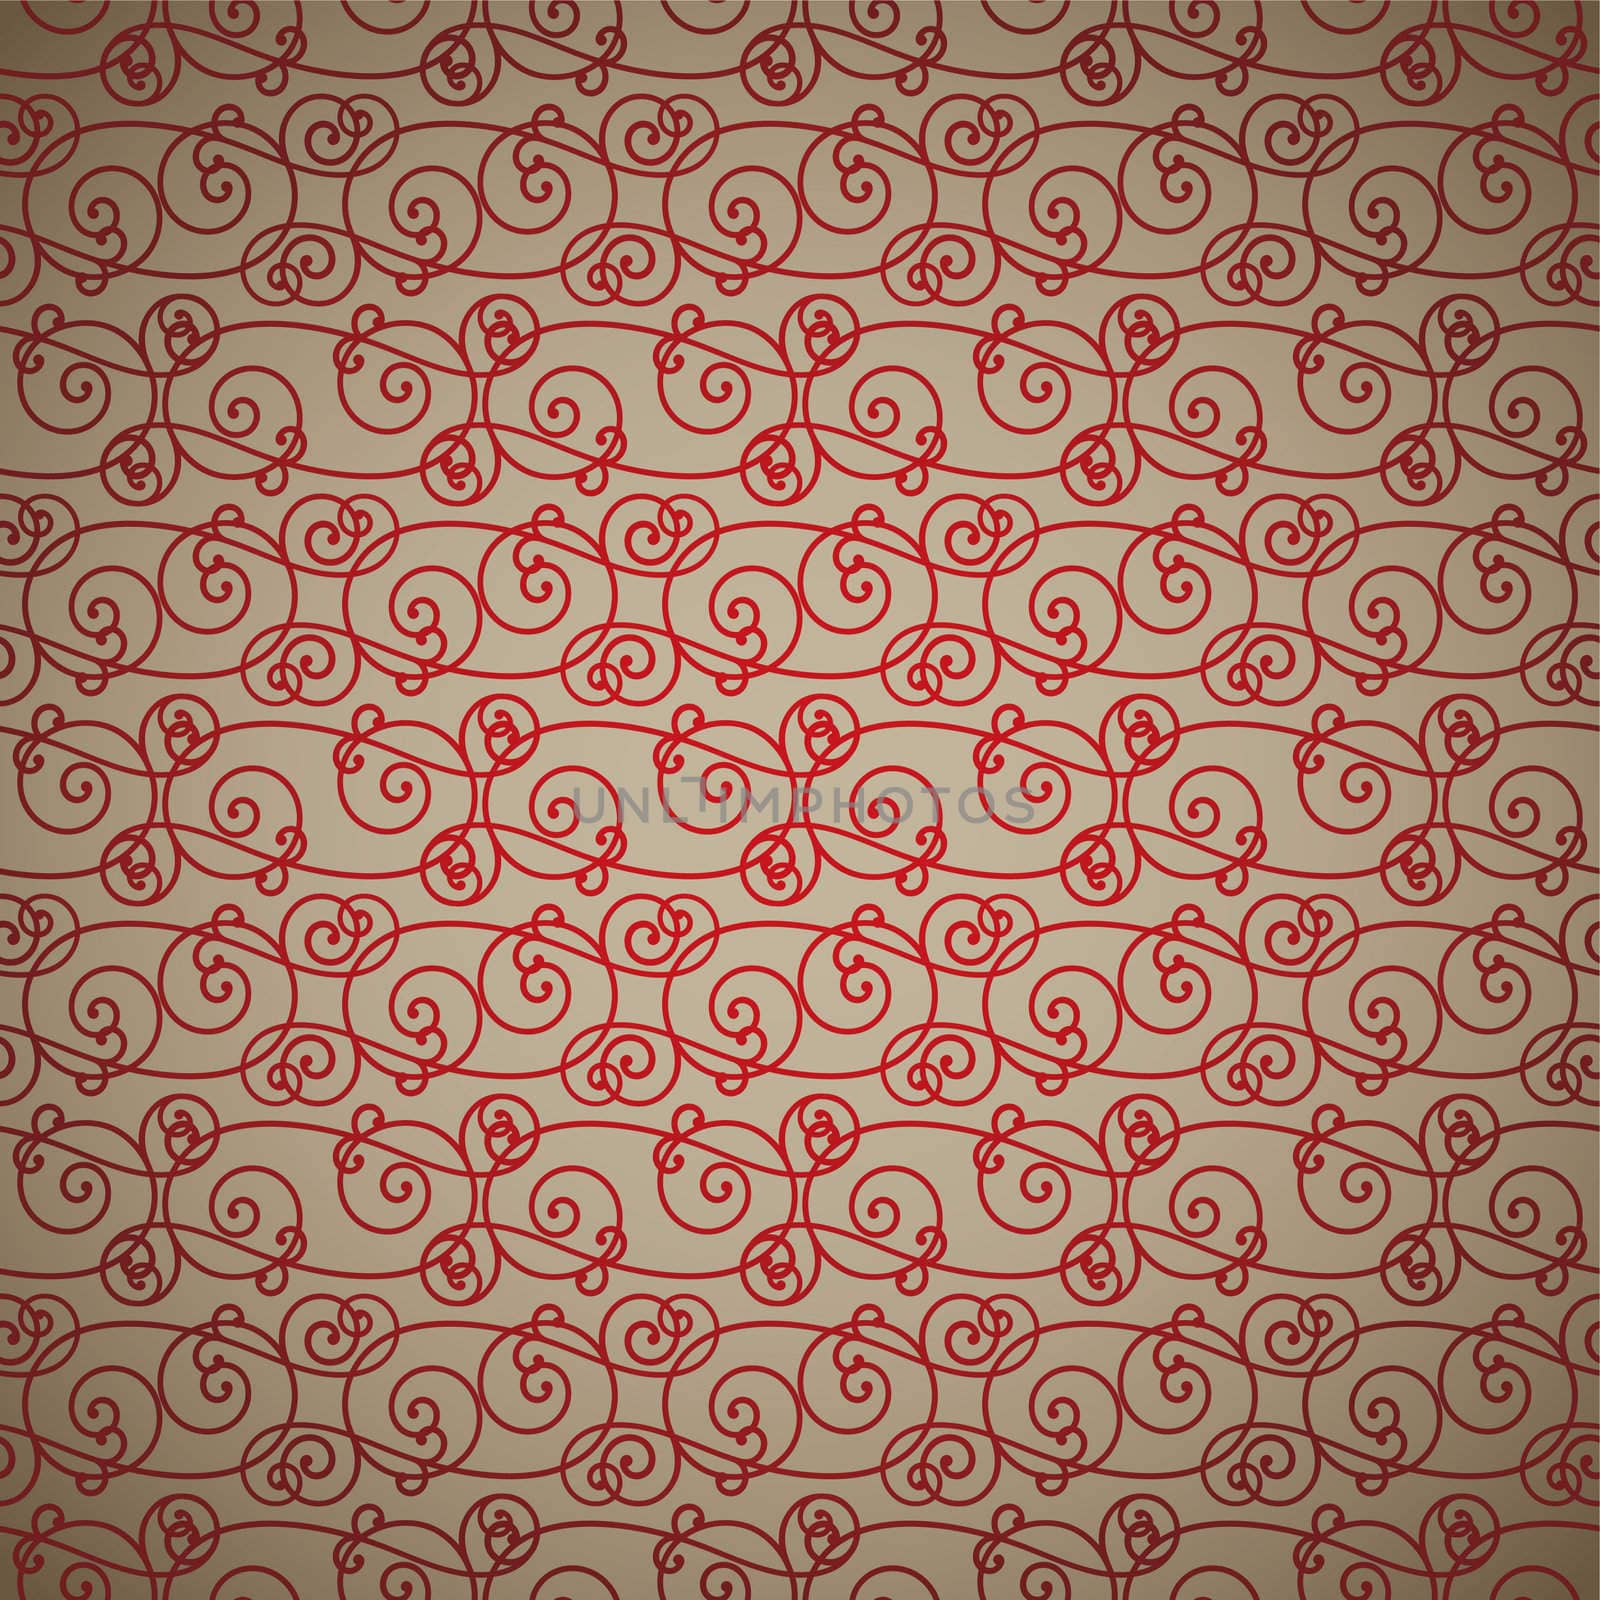 interlinking red and fawn abstract background repeating design